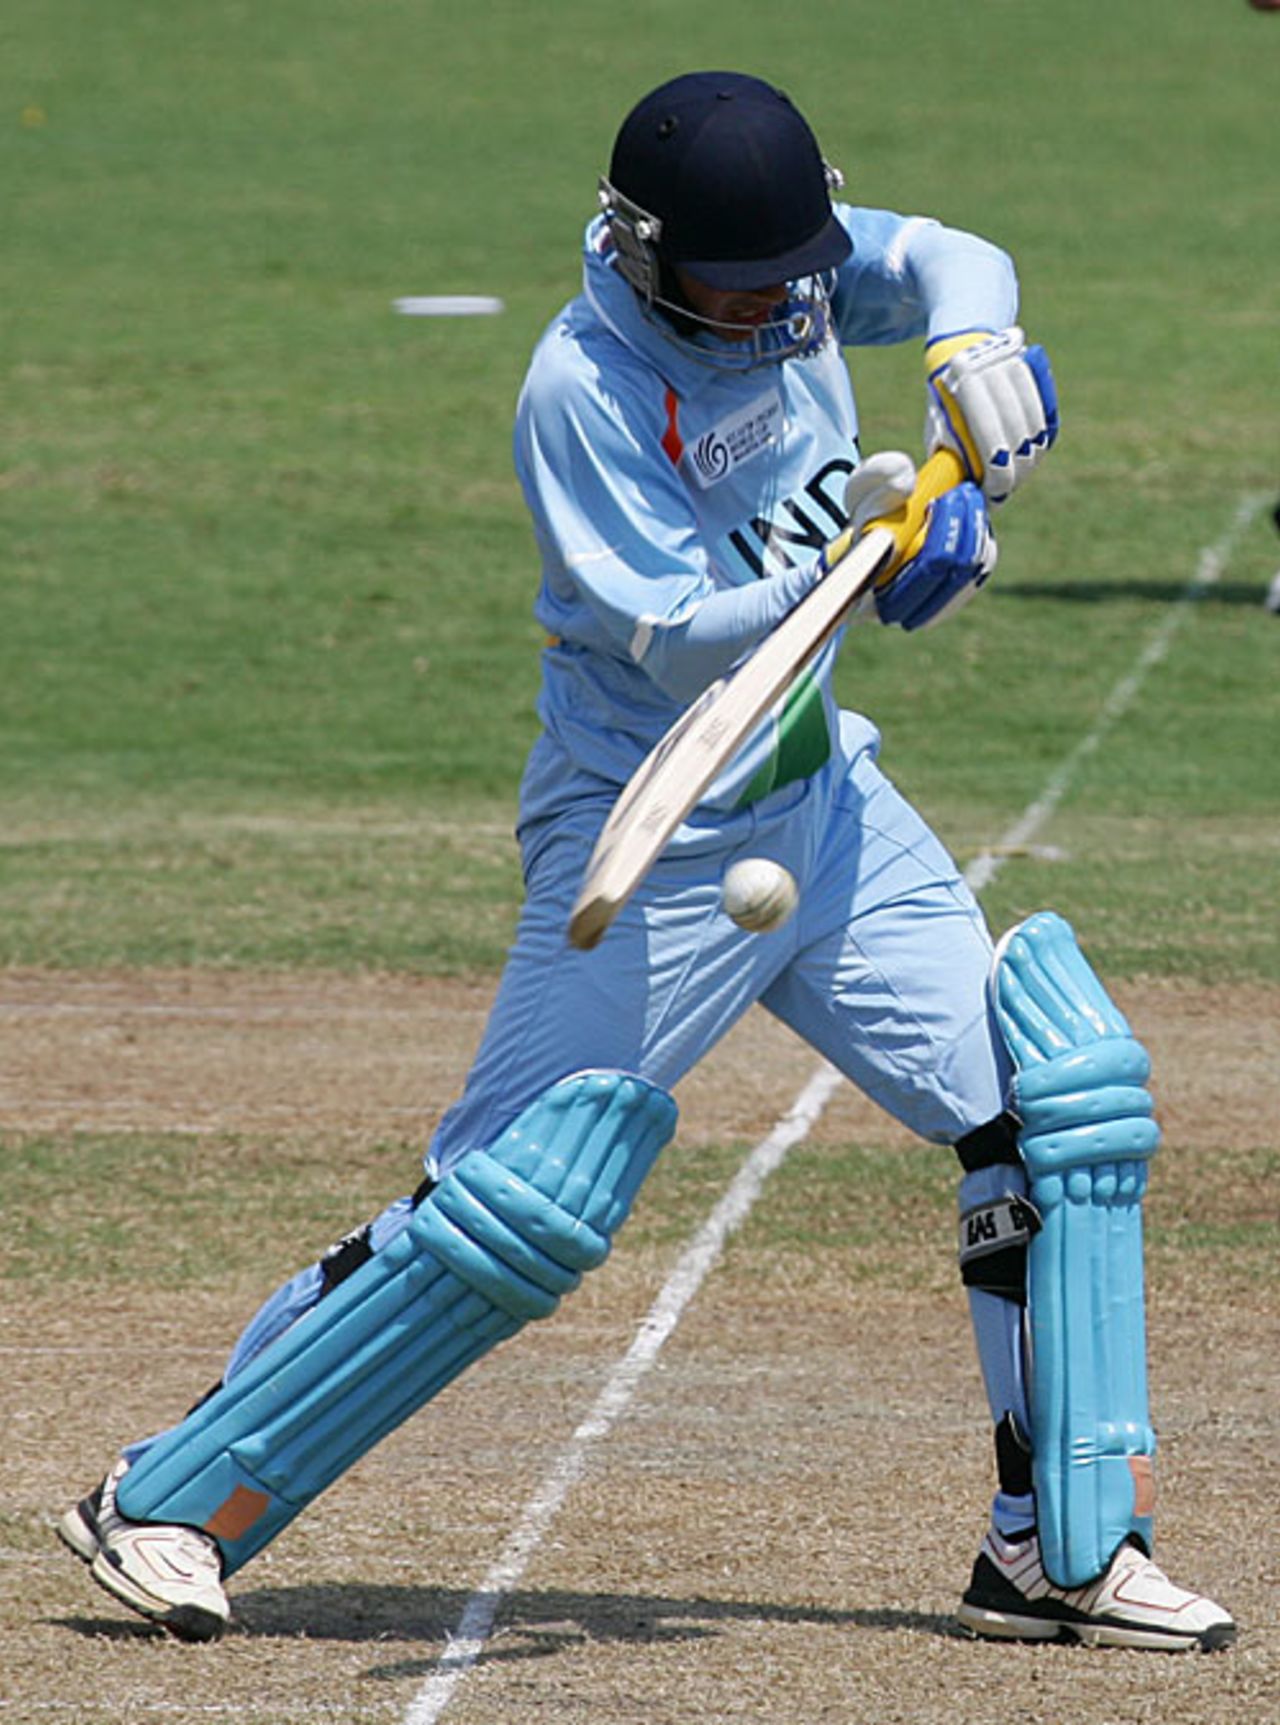 Turuwar Kohli defends off the back foot, India Under-19s v South Africa Under-19s, Group B, Under-19 World Cup, Kuala Lumpur, February 19, 2008 




